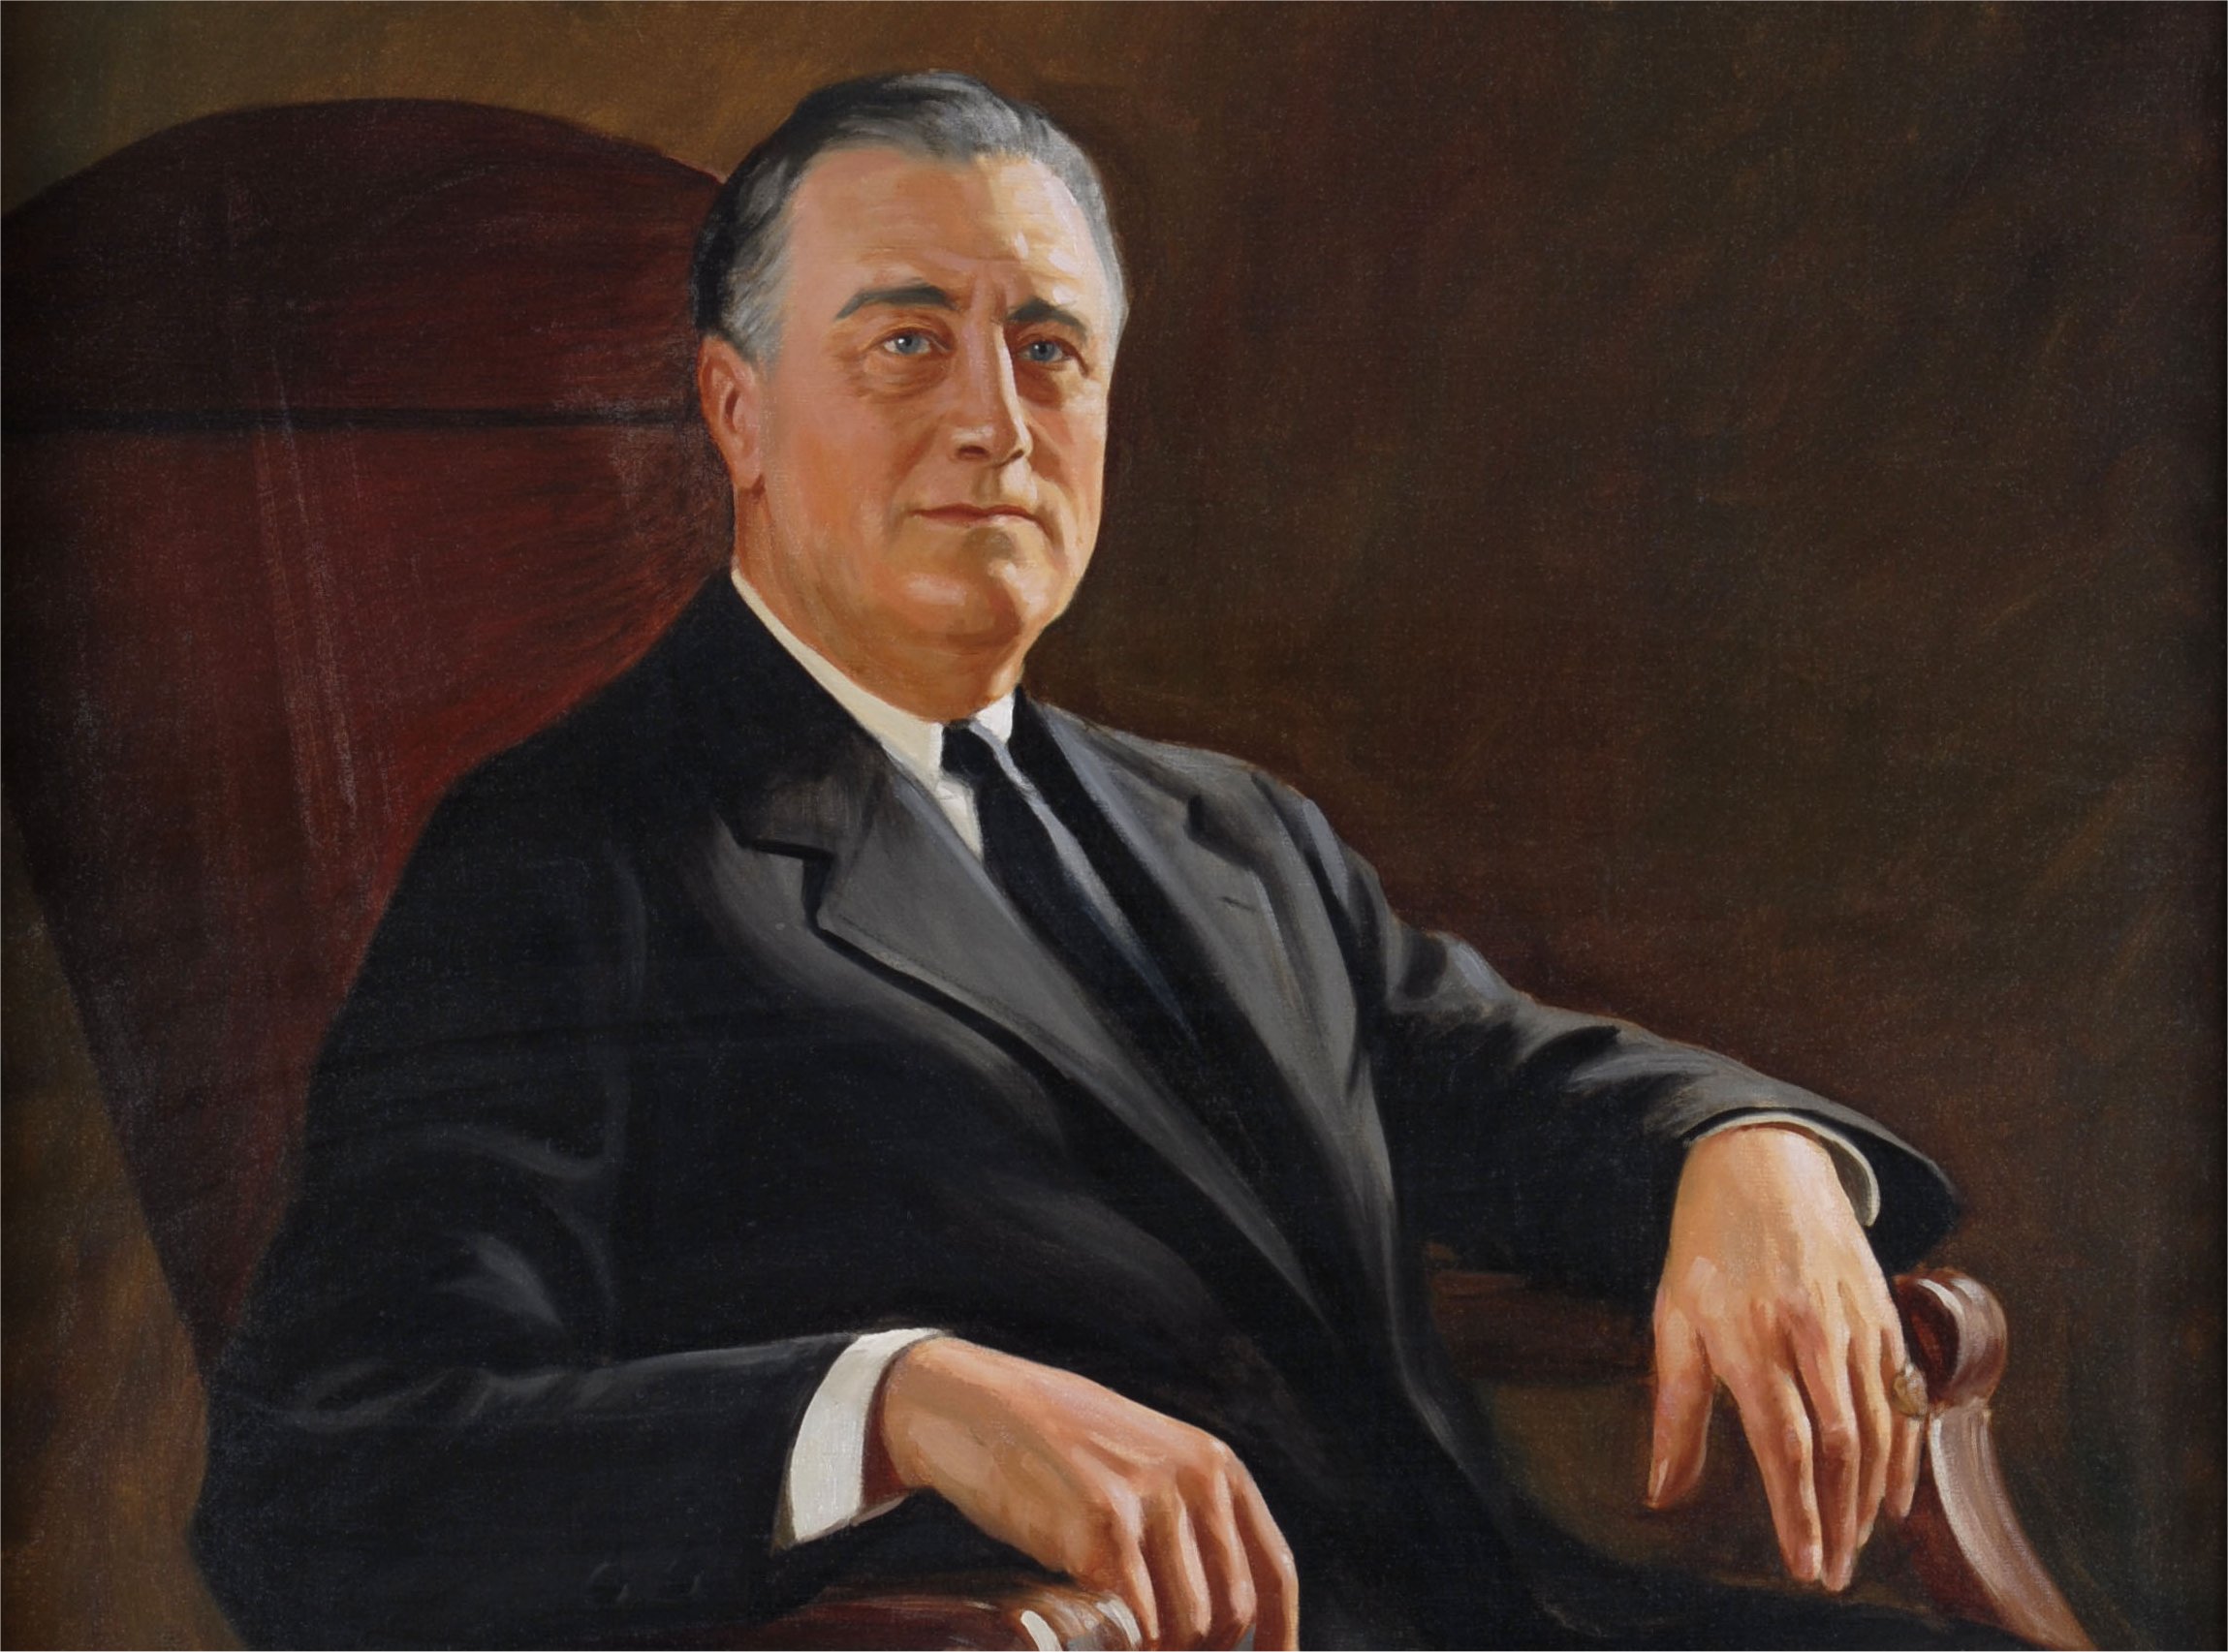 Quotes and sayings from Franklin D. Roosevelt